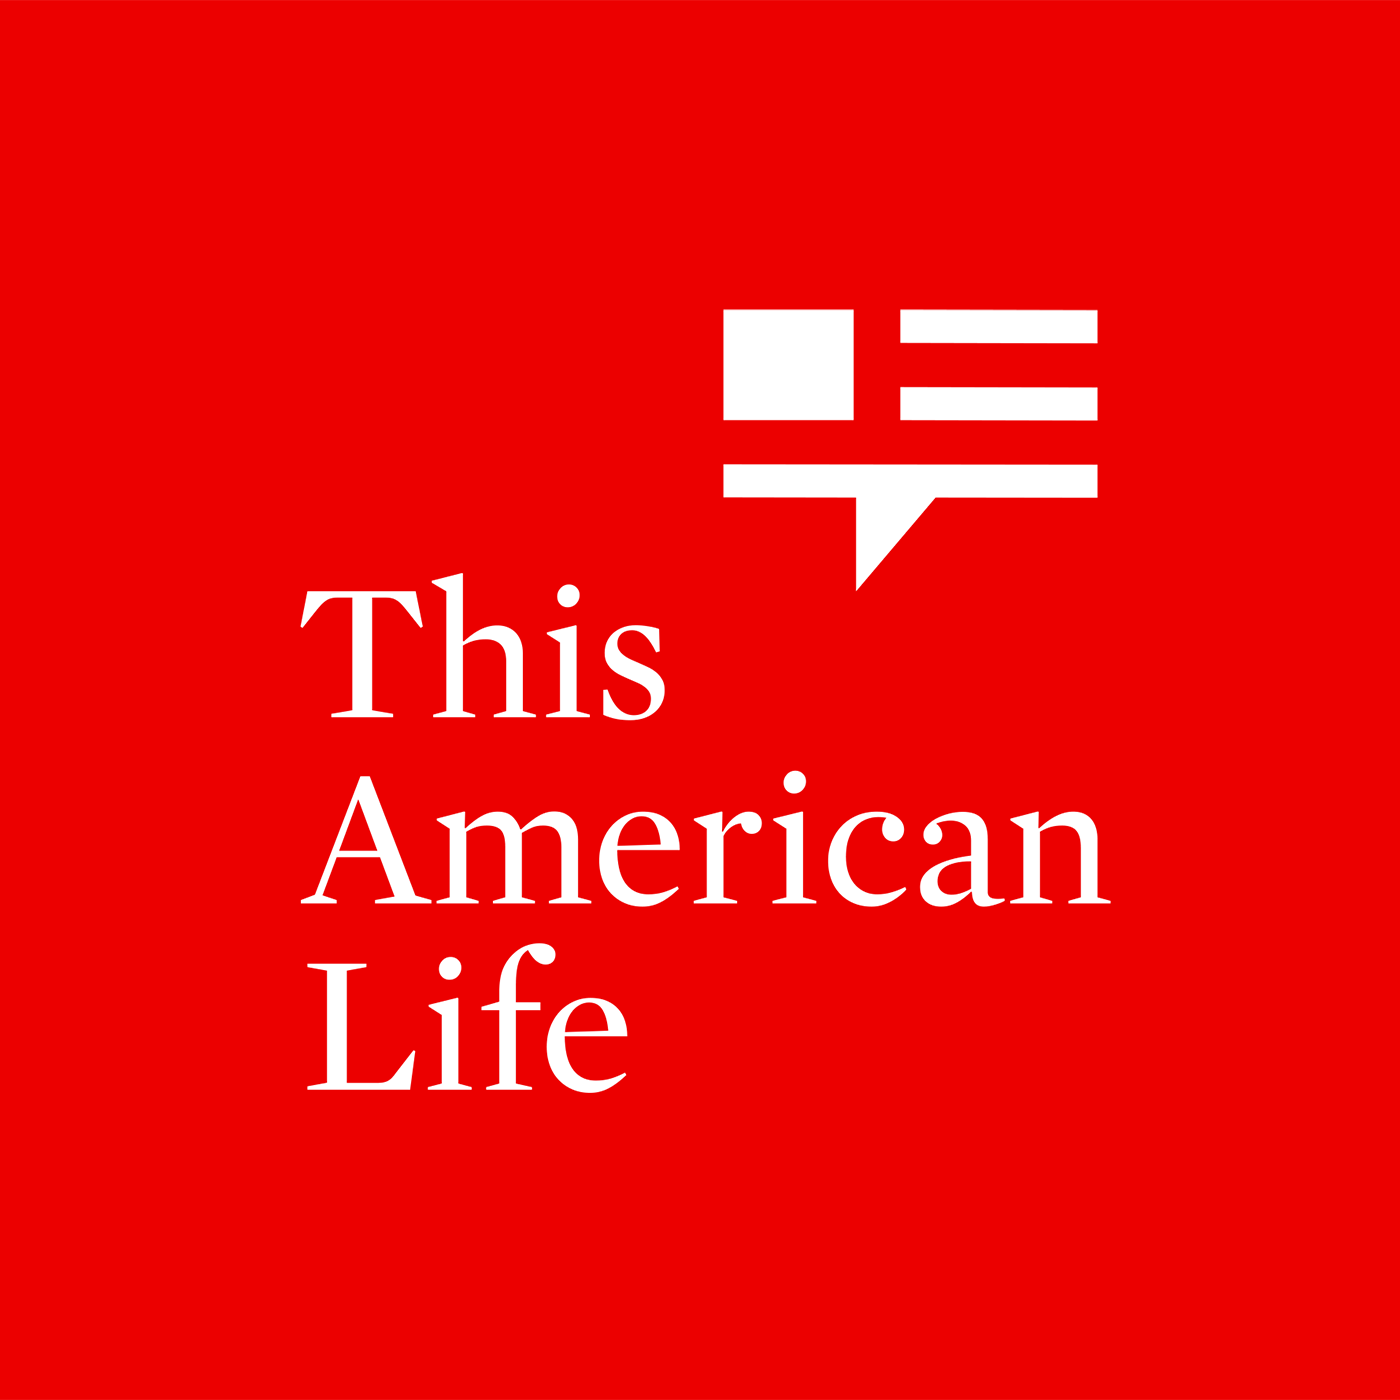 3. This American Life